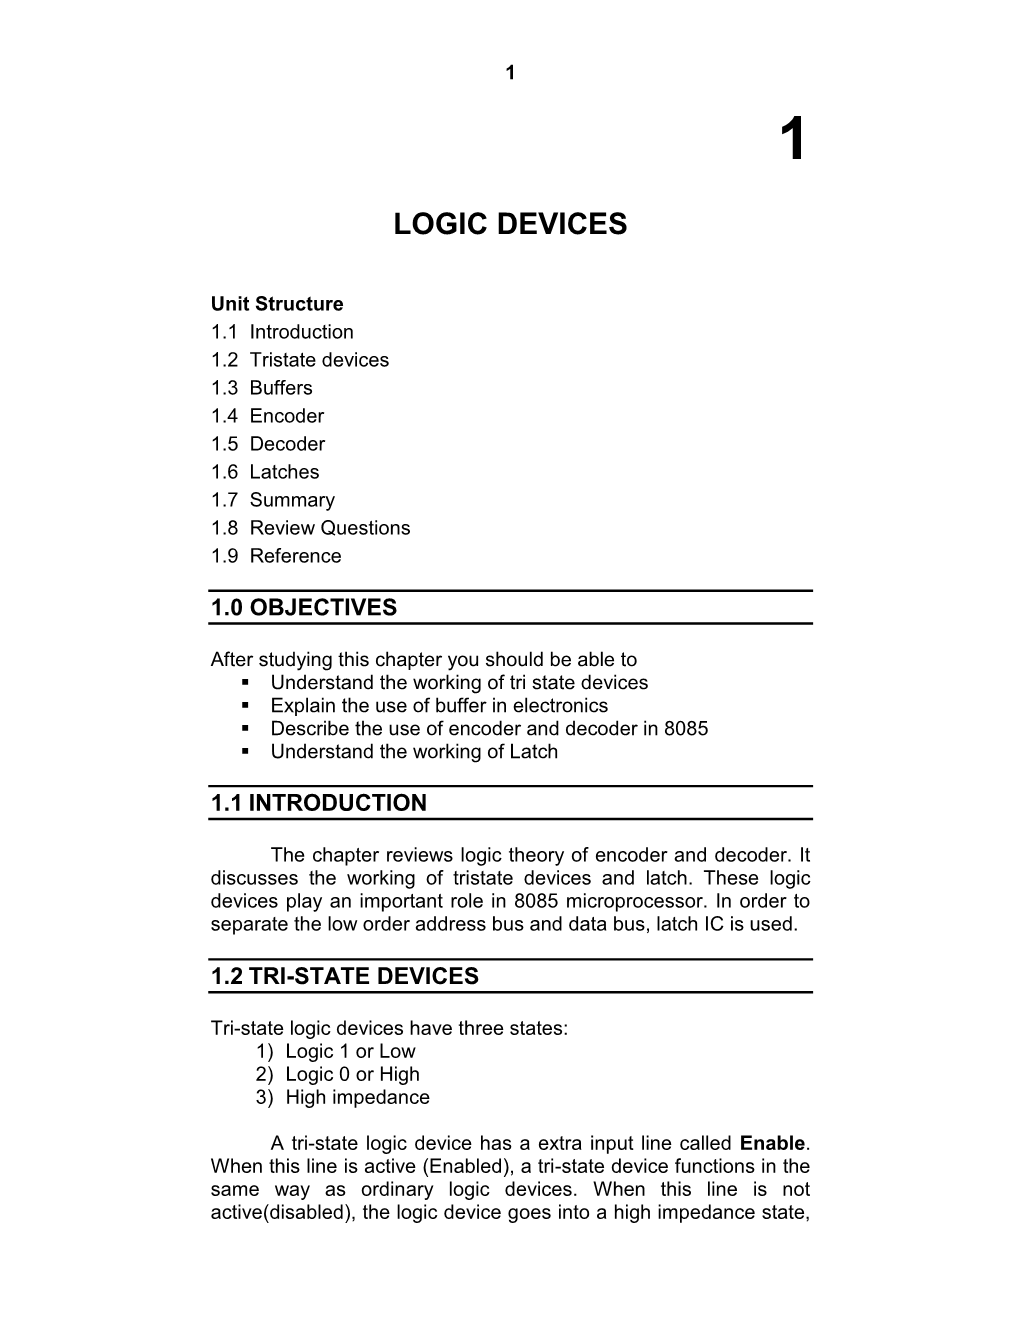 Logic Devices